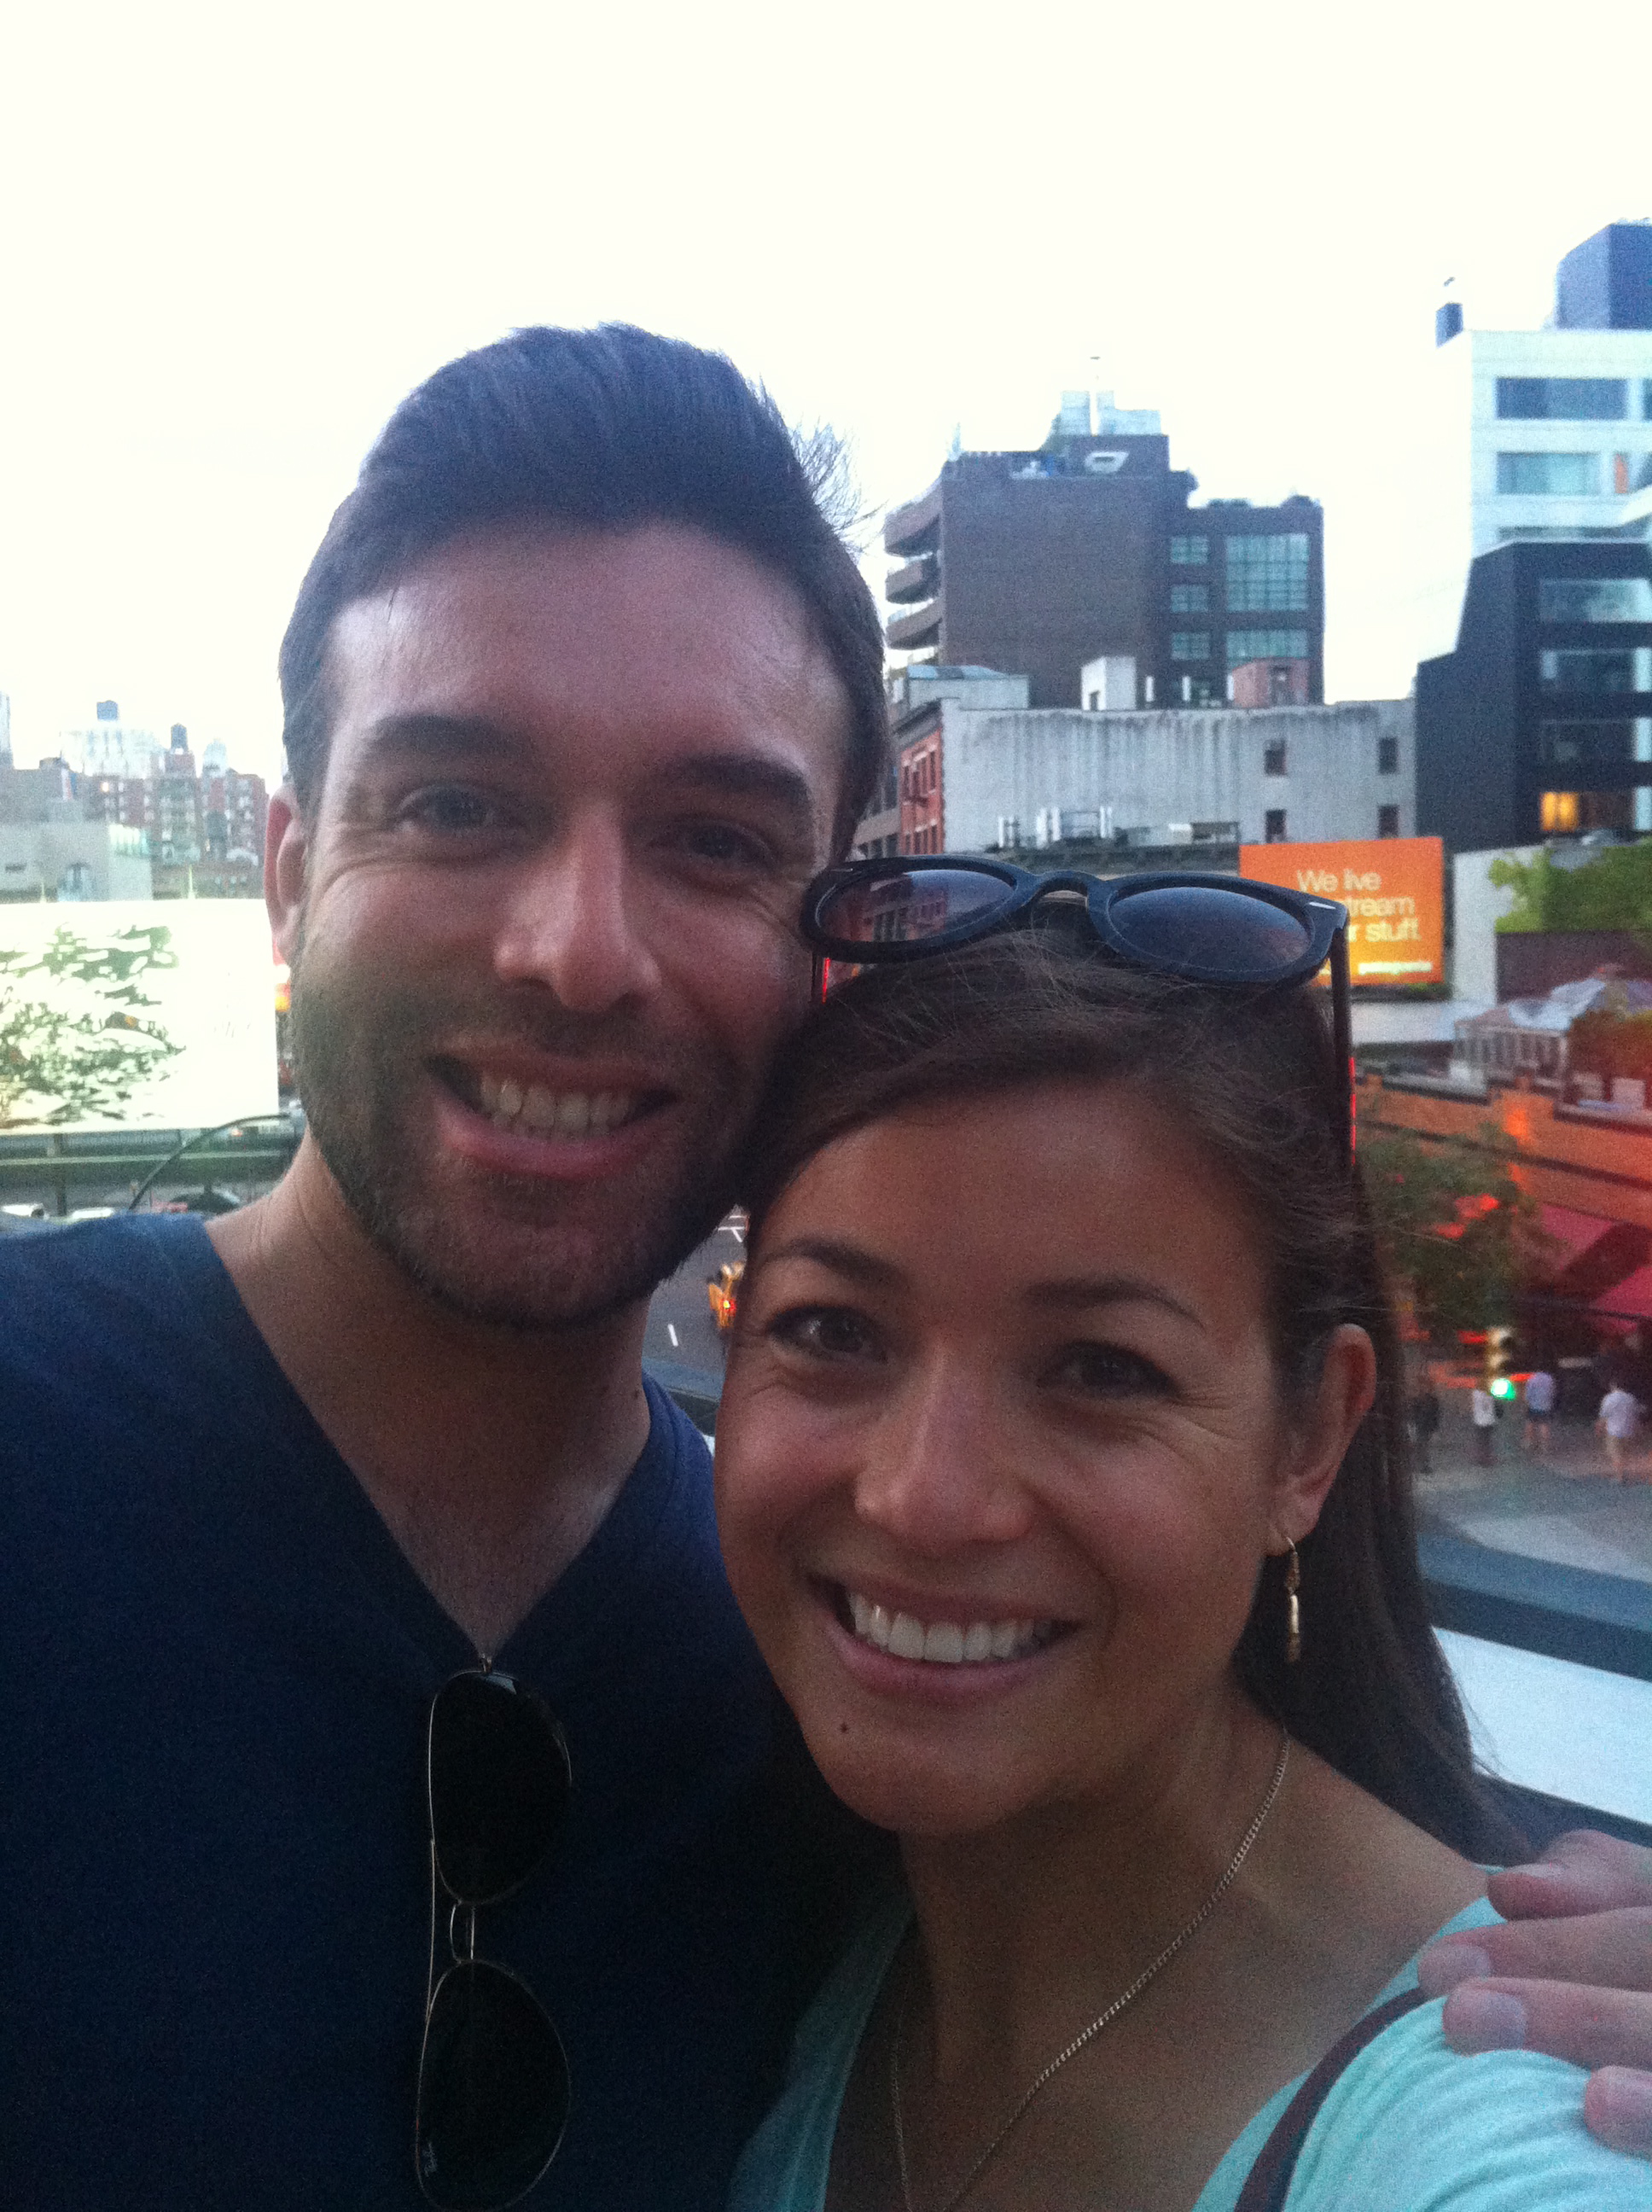 NYC Foodie Trip Day 3 - The Highline